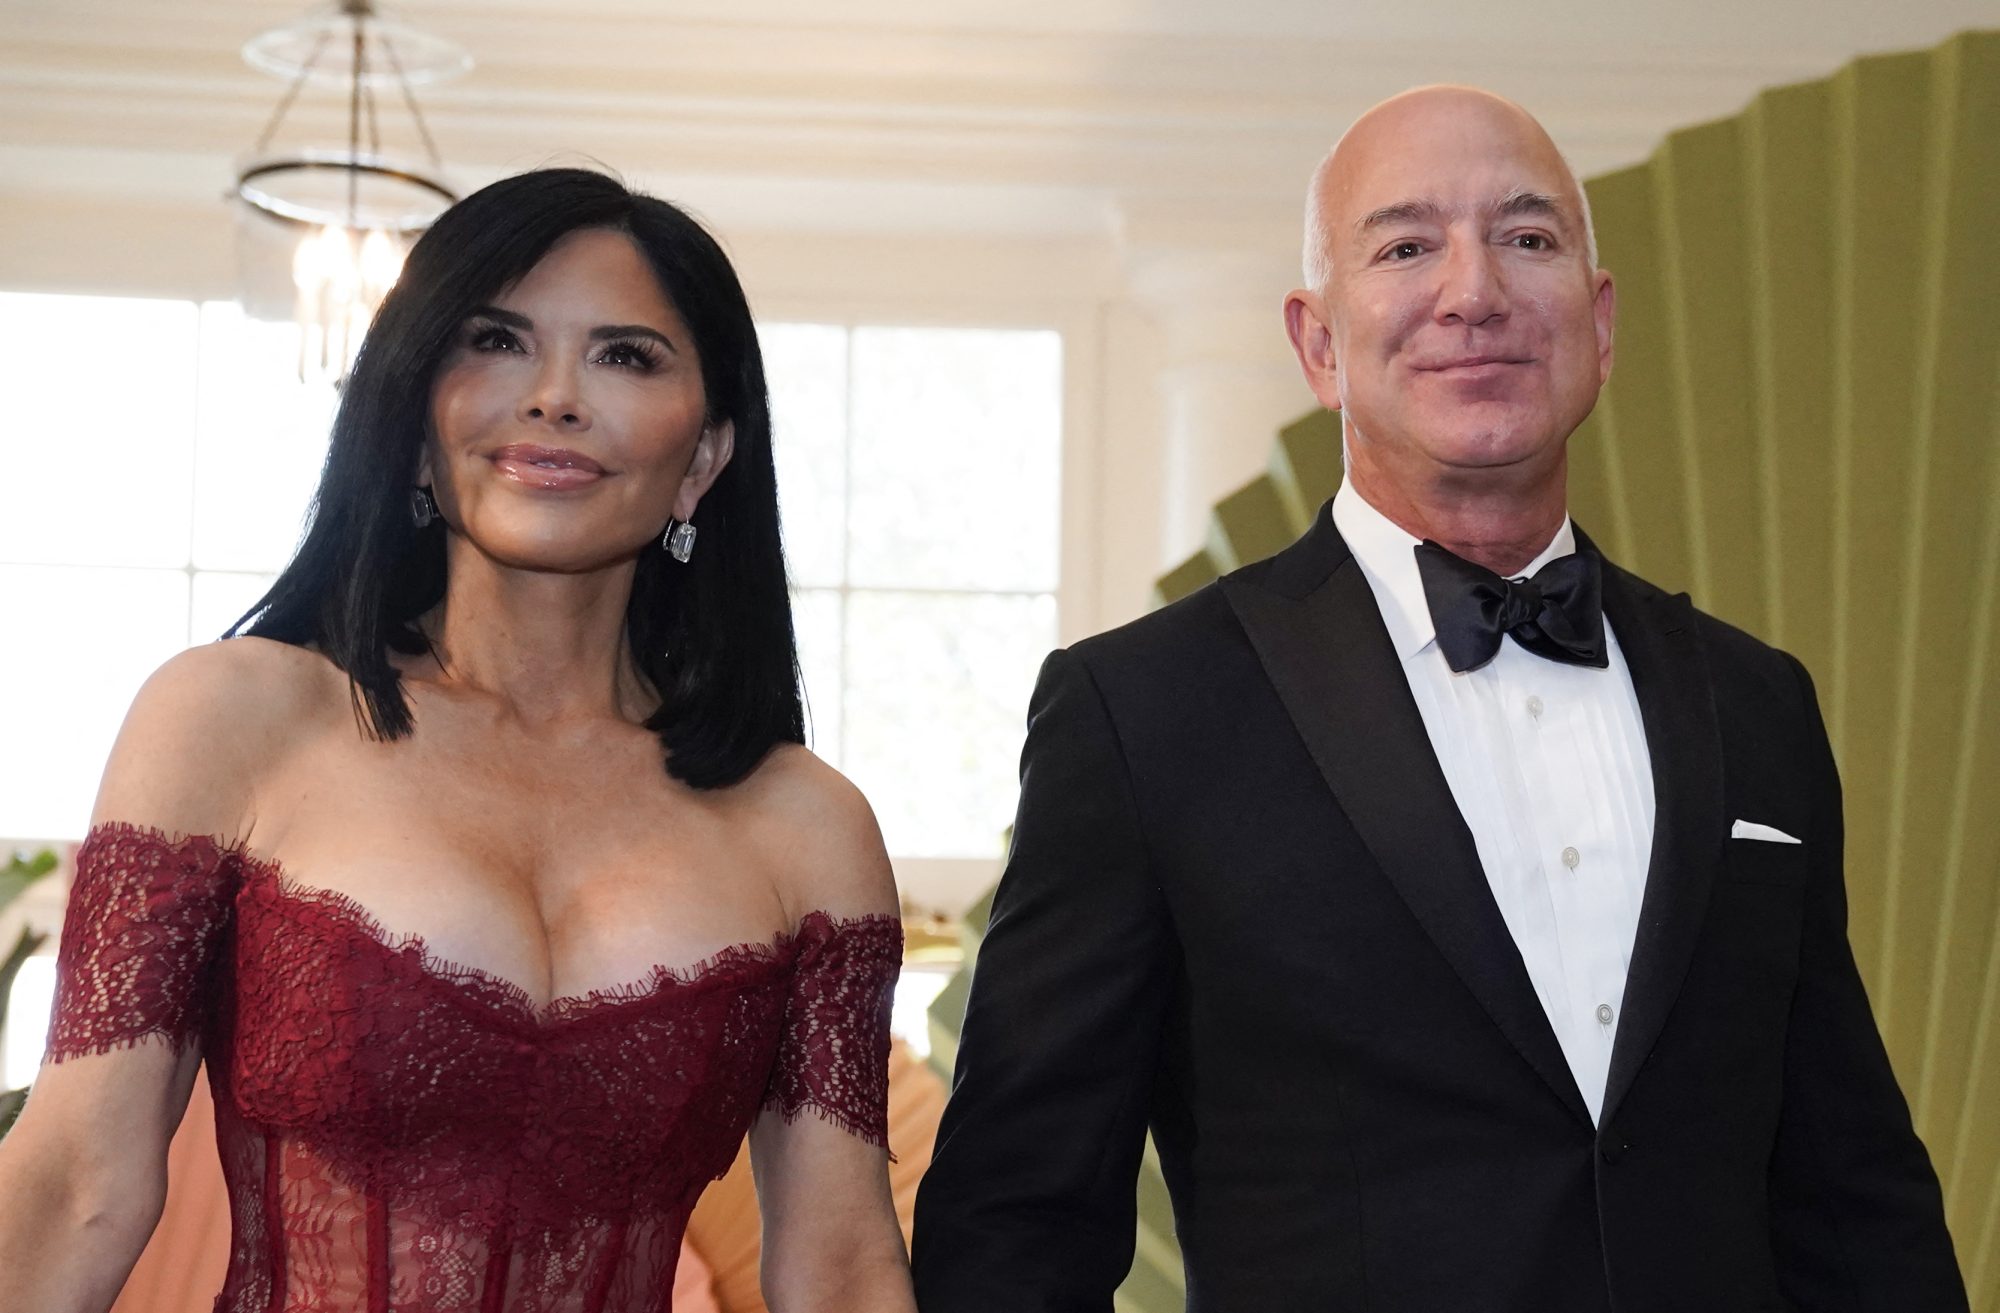 Jeff Bezos and Lauren Sanchez smile as they arrive at the White House.